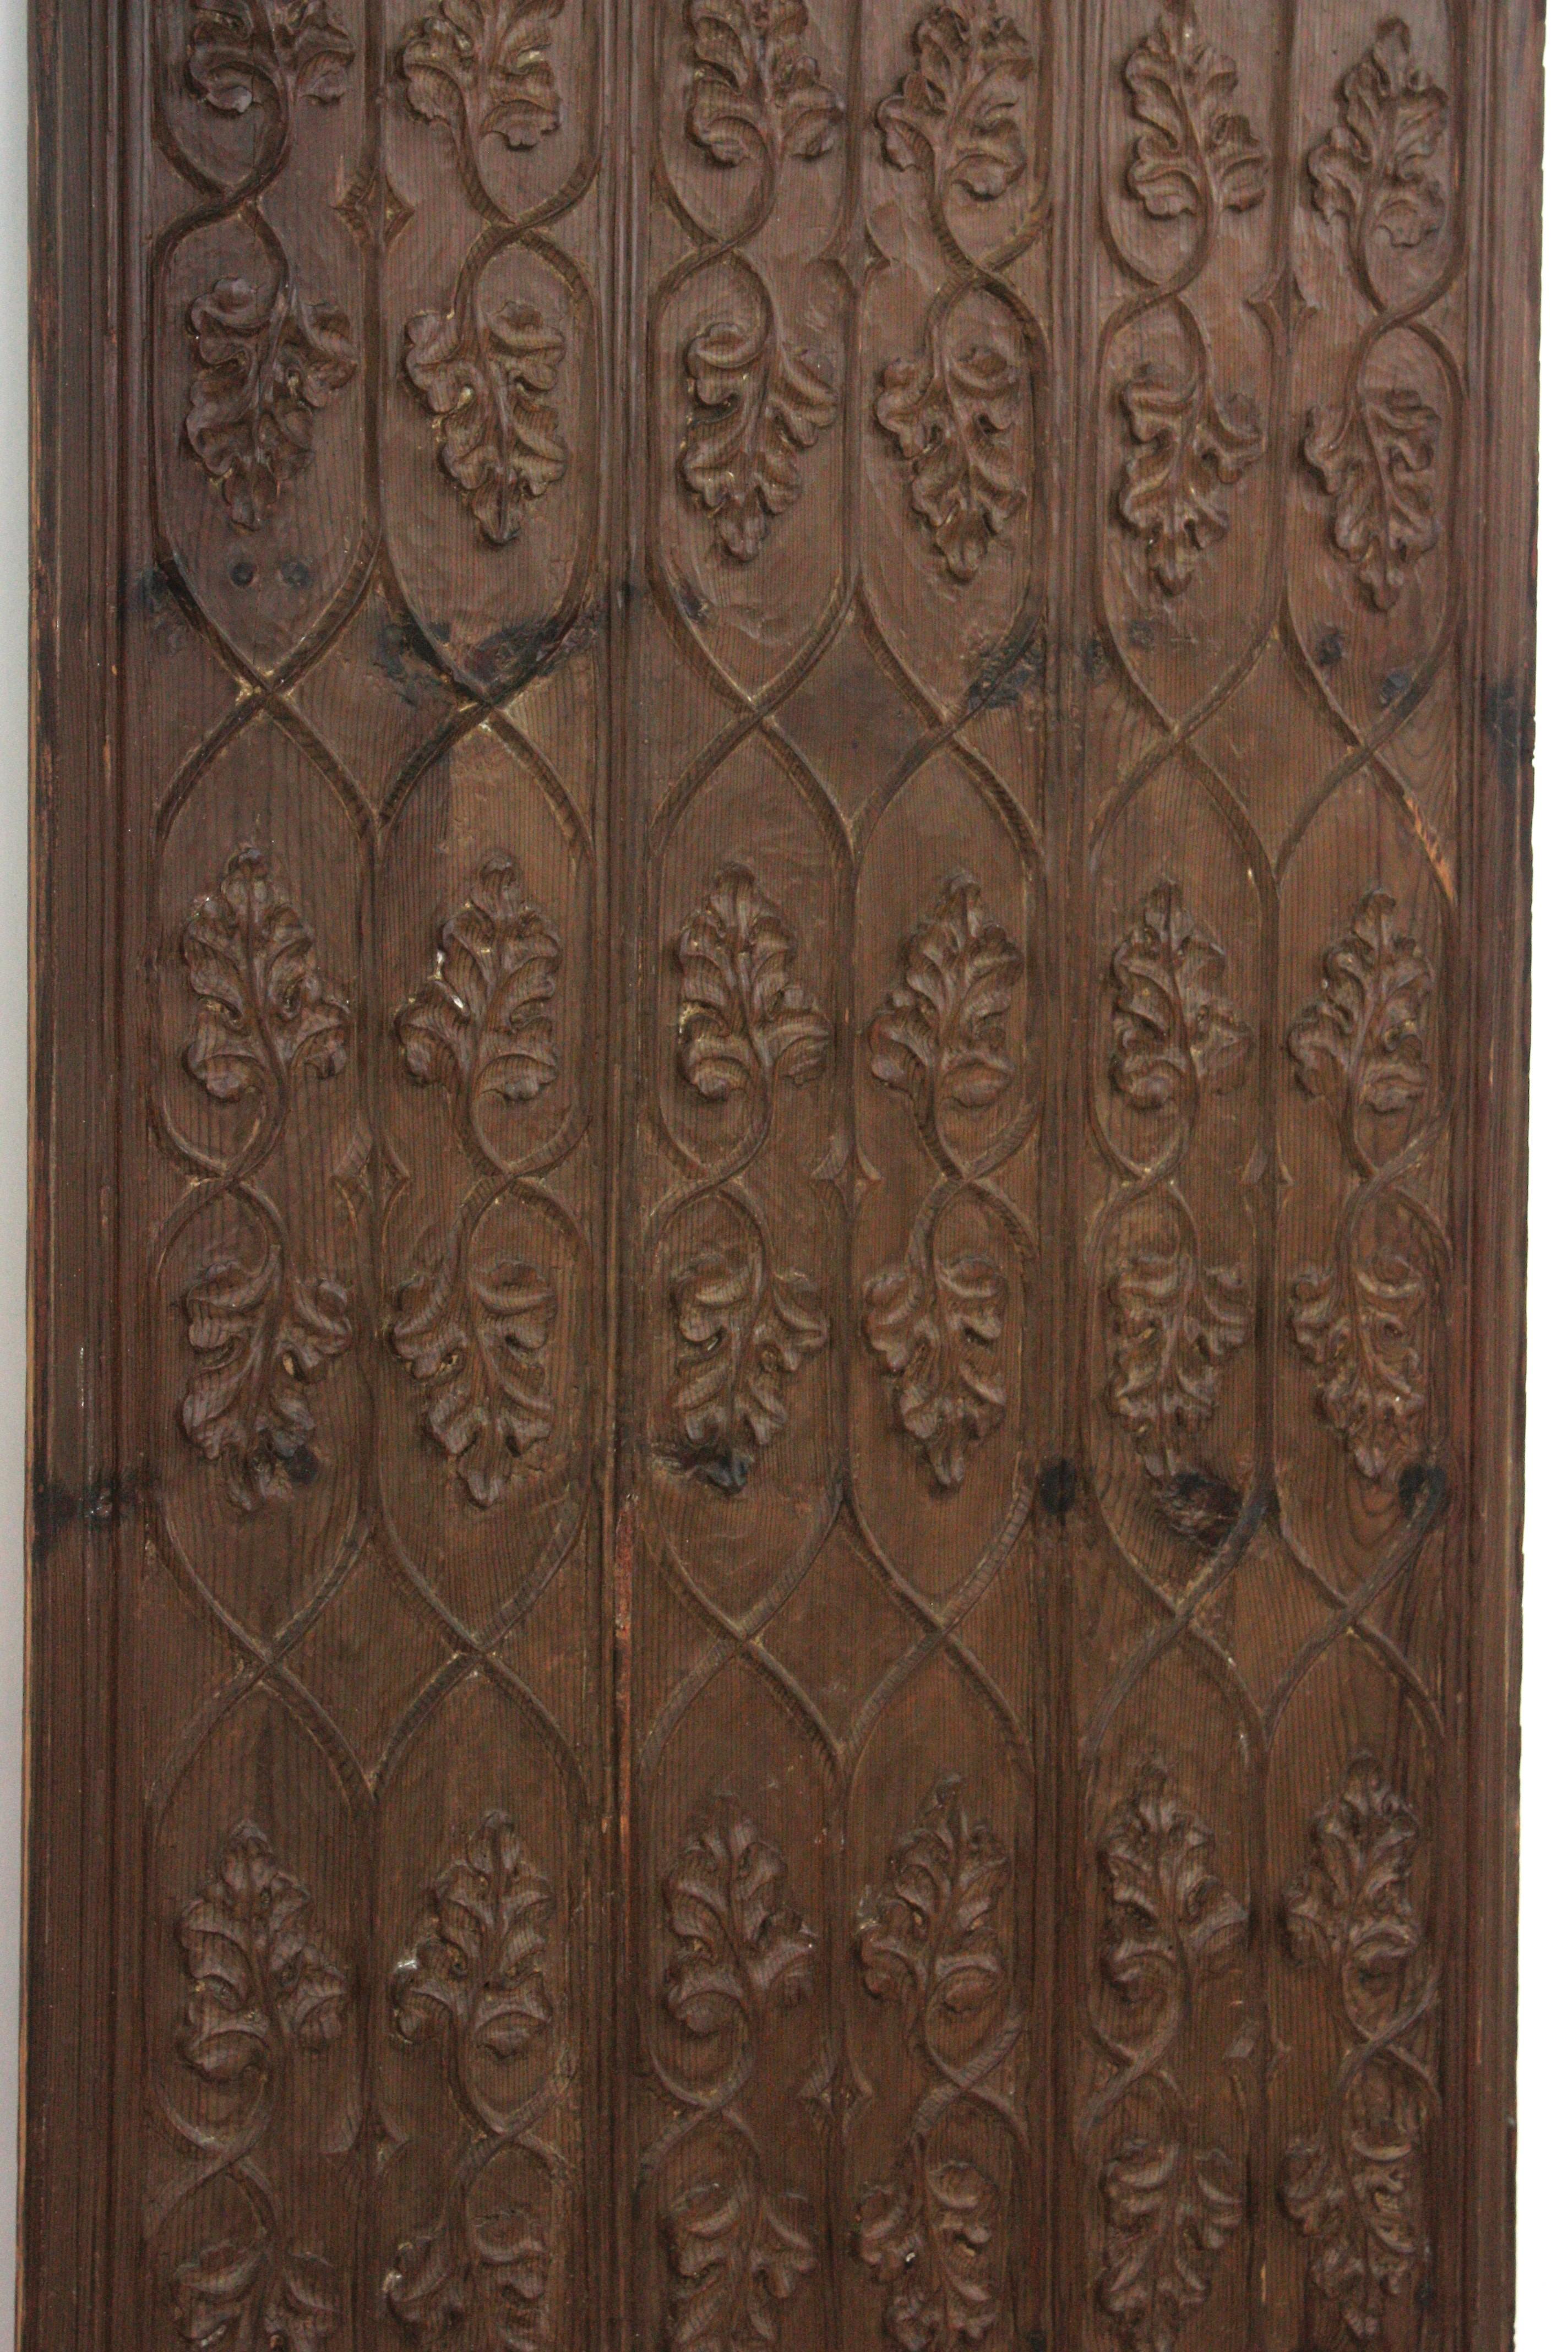 Spanish Hand-Carved Walnut Wood Decorative Wall Panel with Foliage Motifs For Sale 5